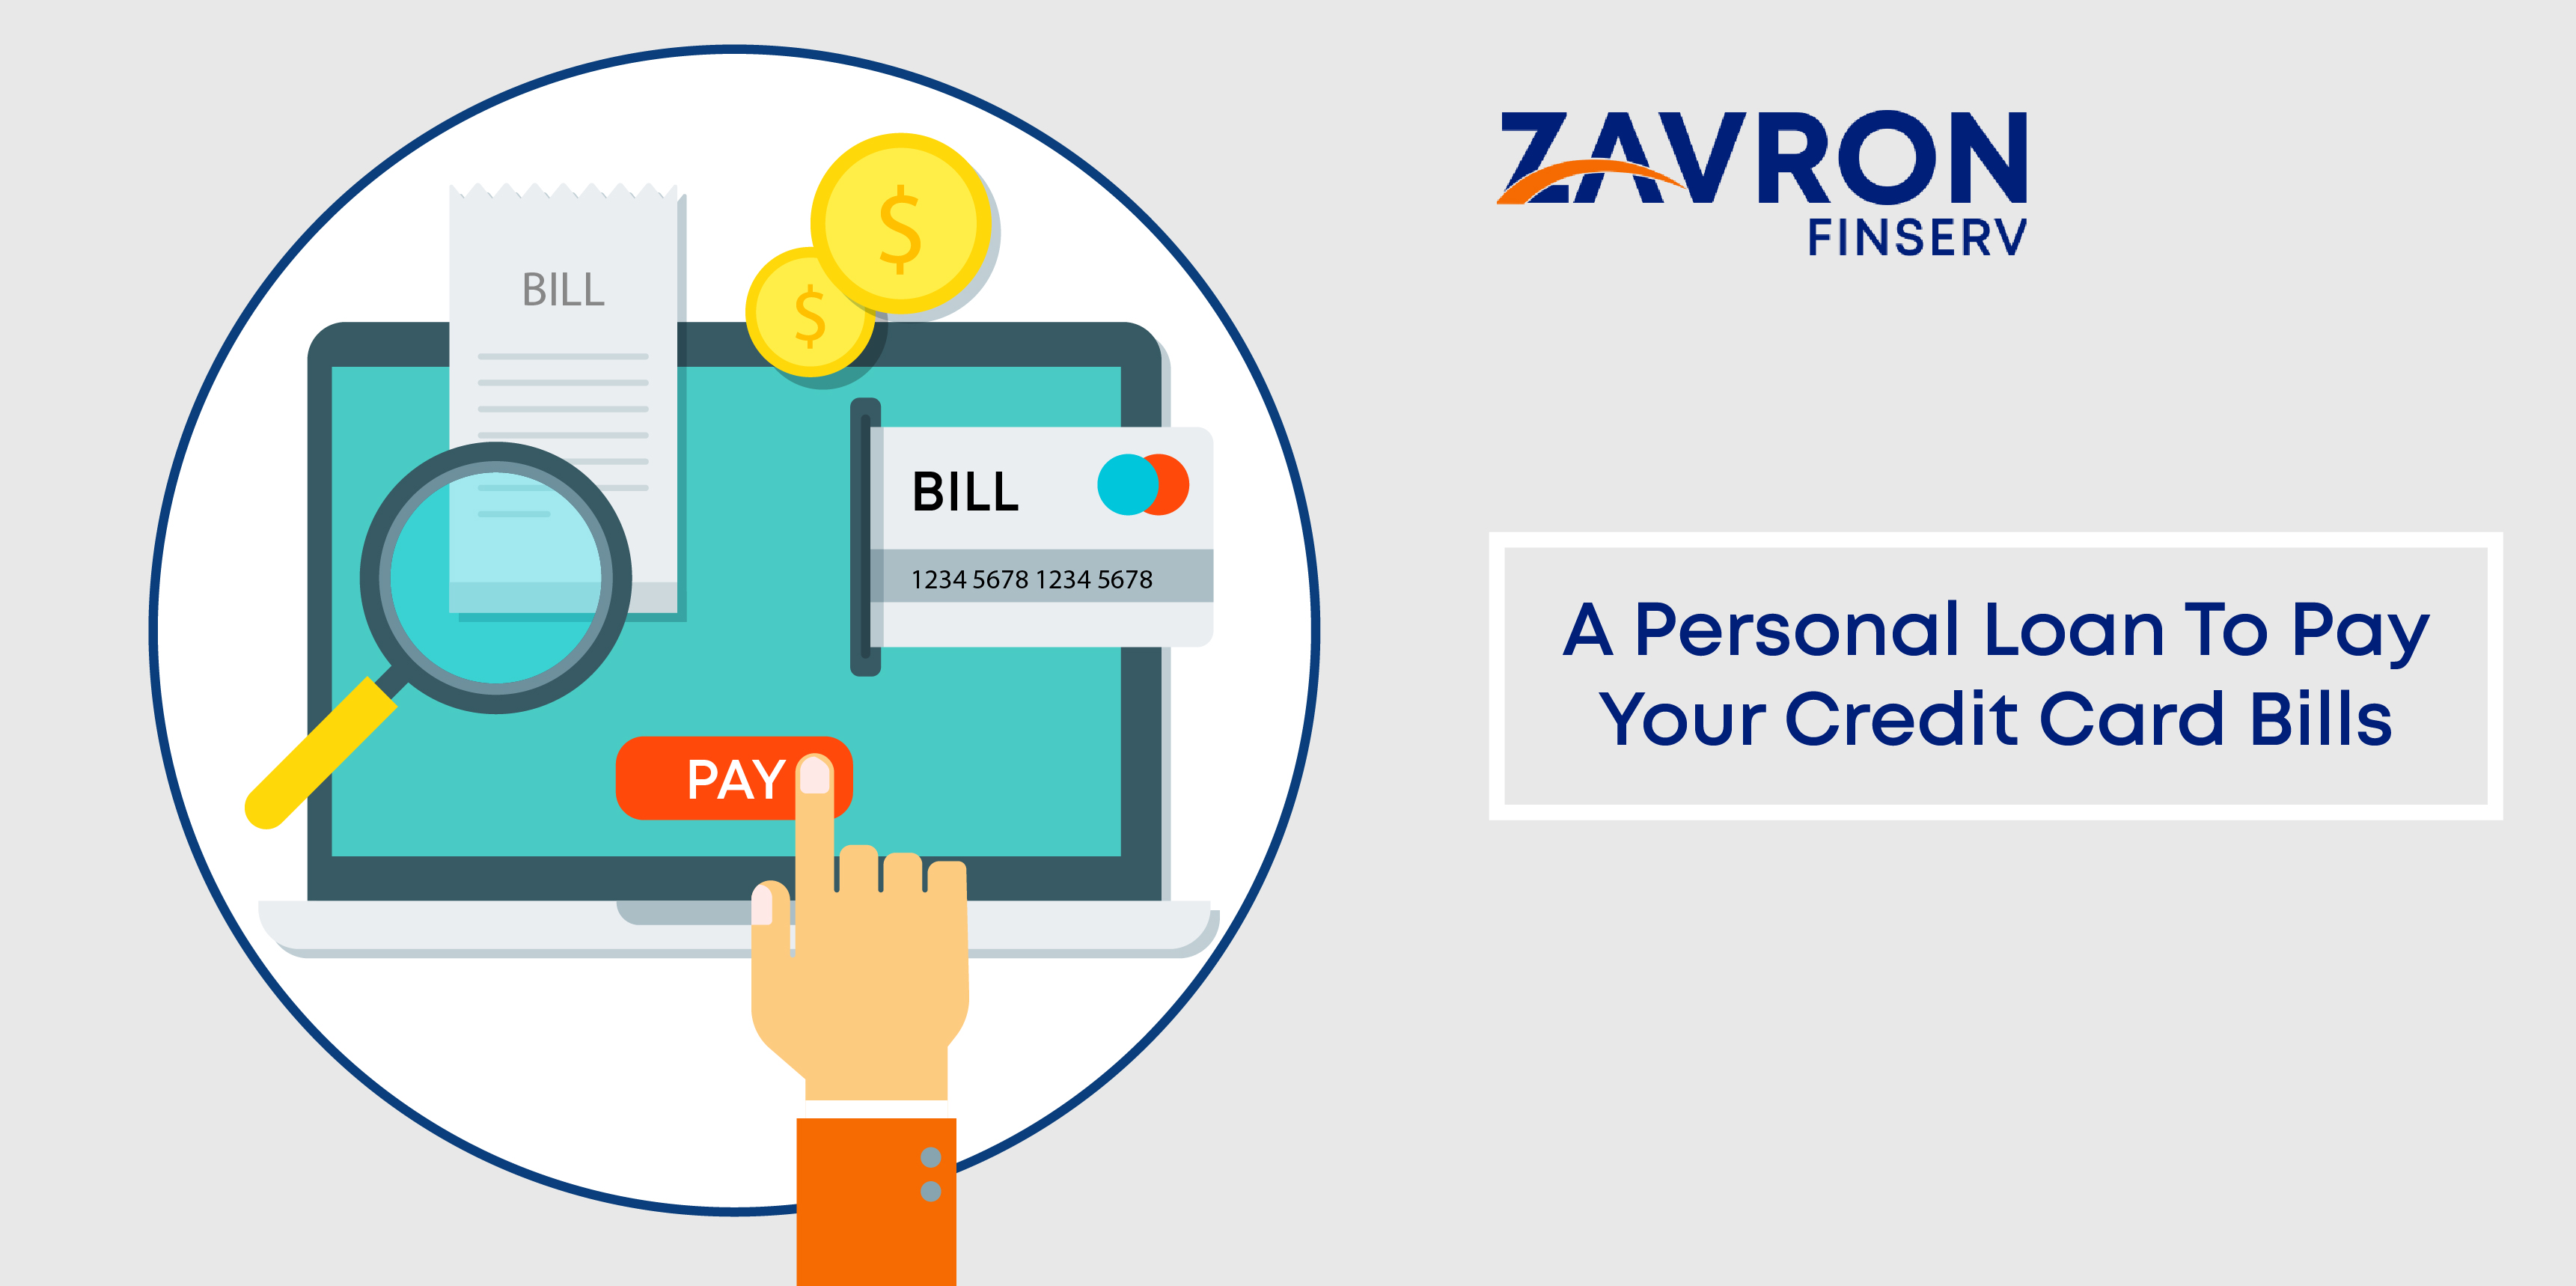 Things To Keep In Mind While Availing A Personal Loan To Pay Your Credit Card Bills